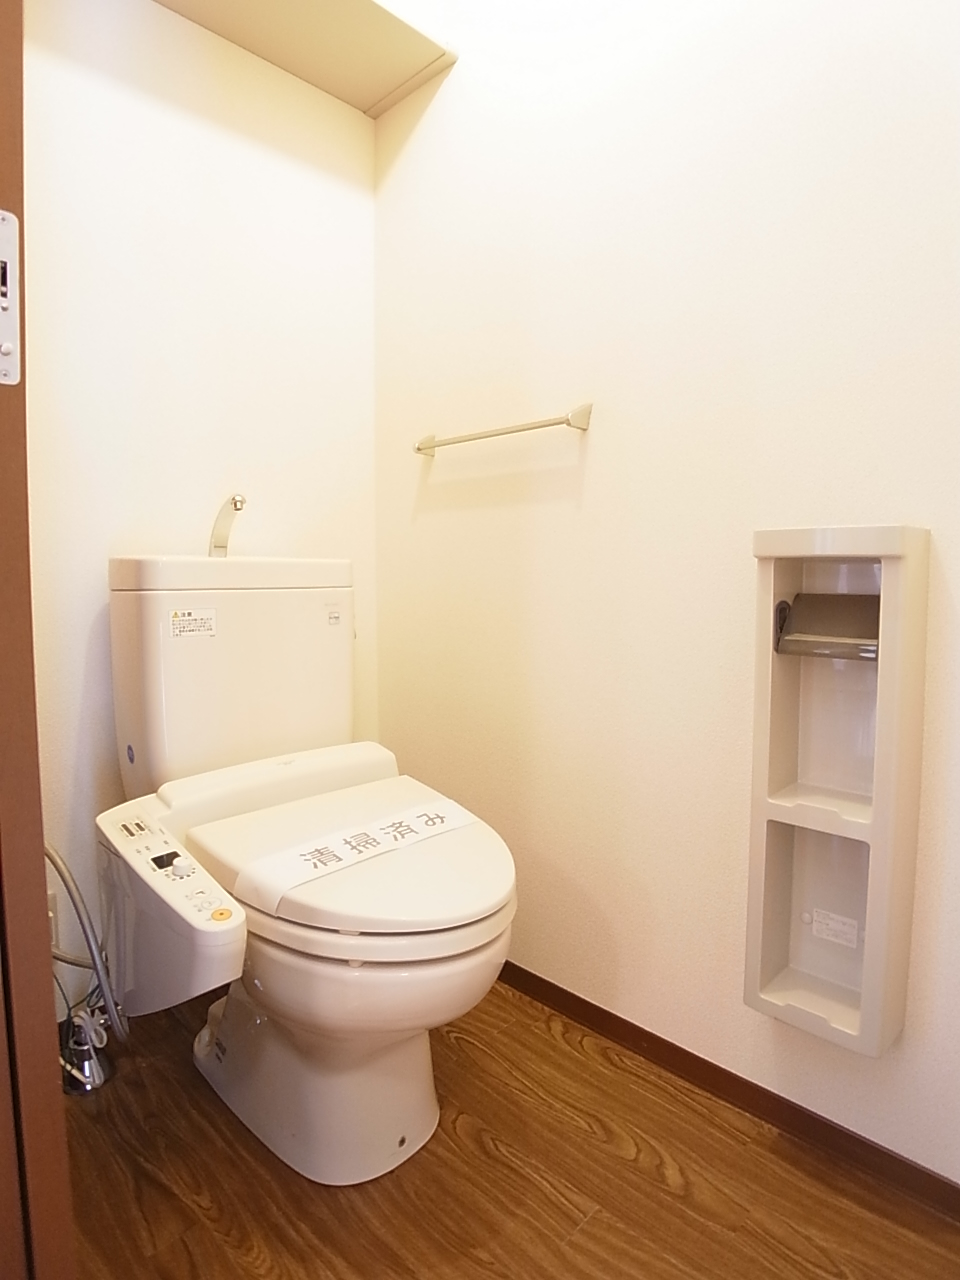 Toilet. With warm water toilet seat, It is safe in this or of winter warm toilet seat